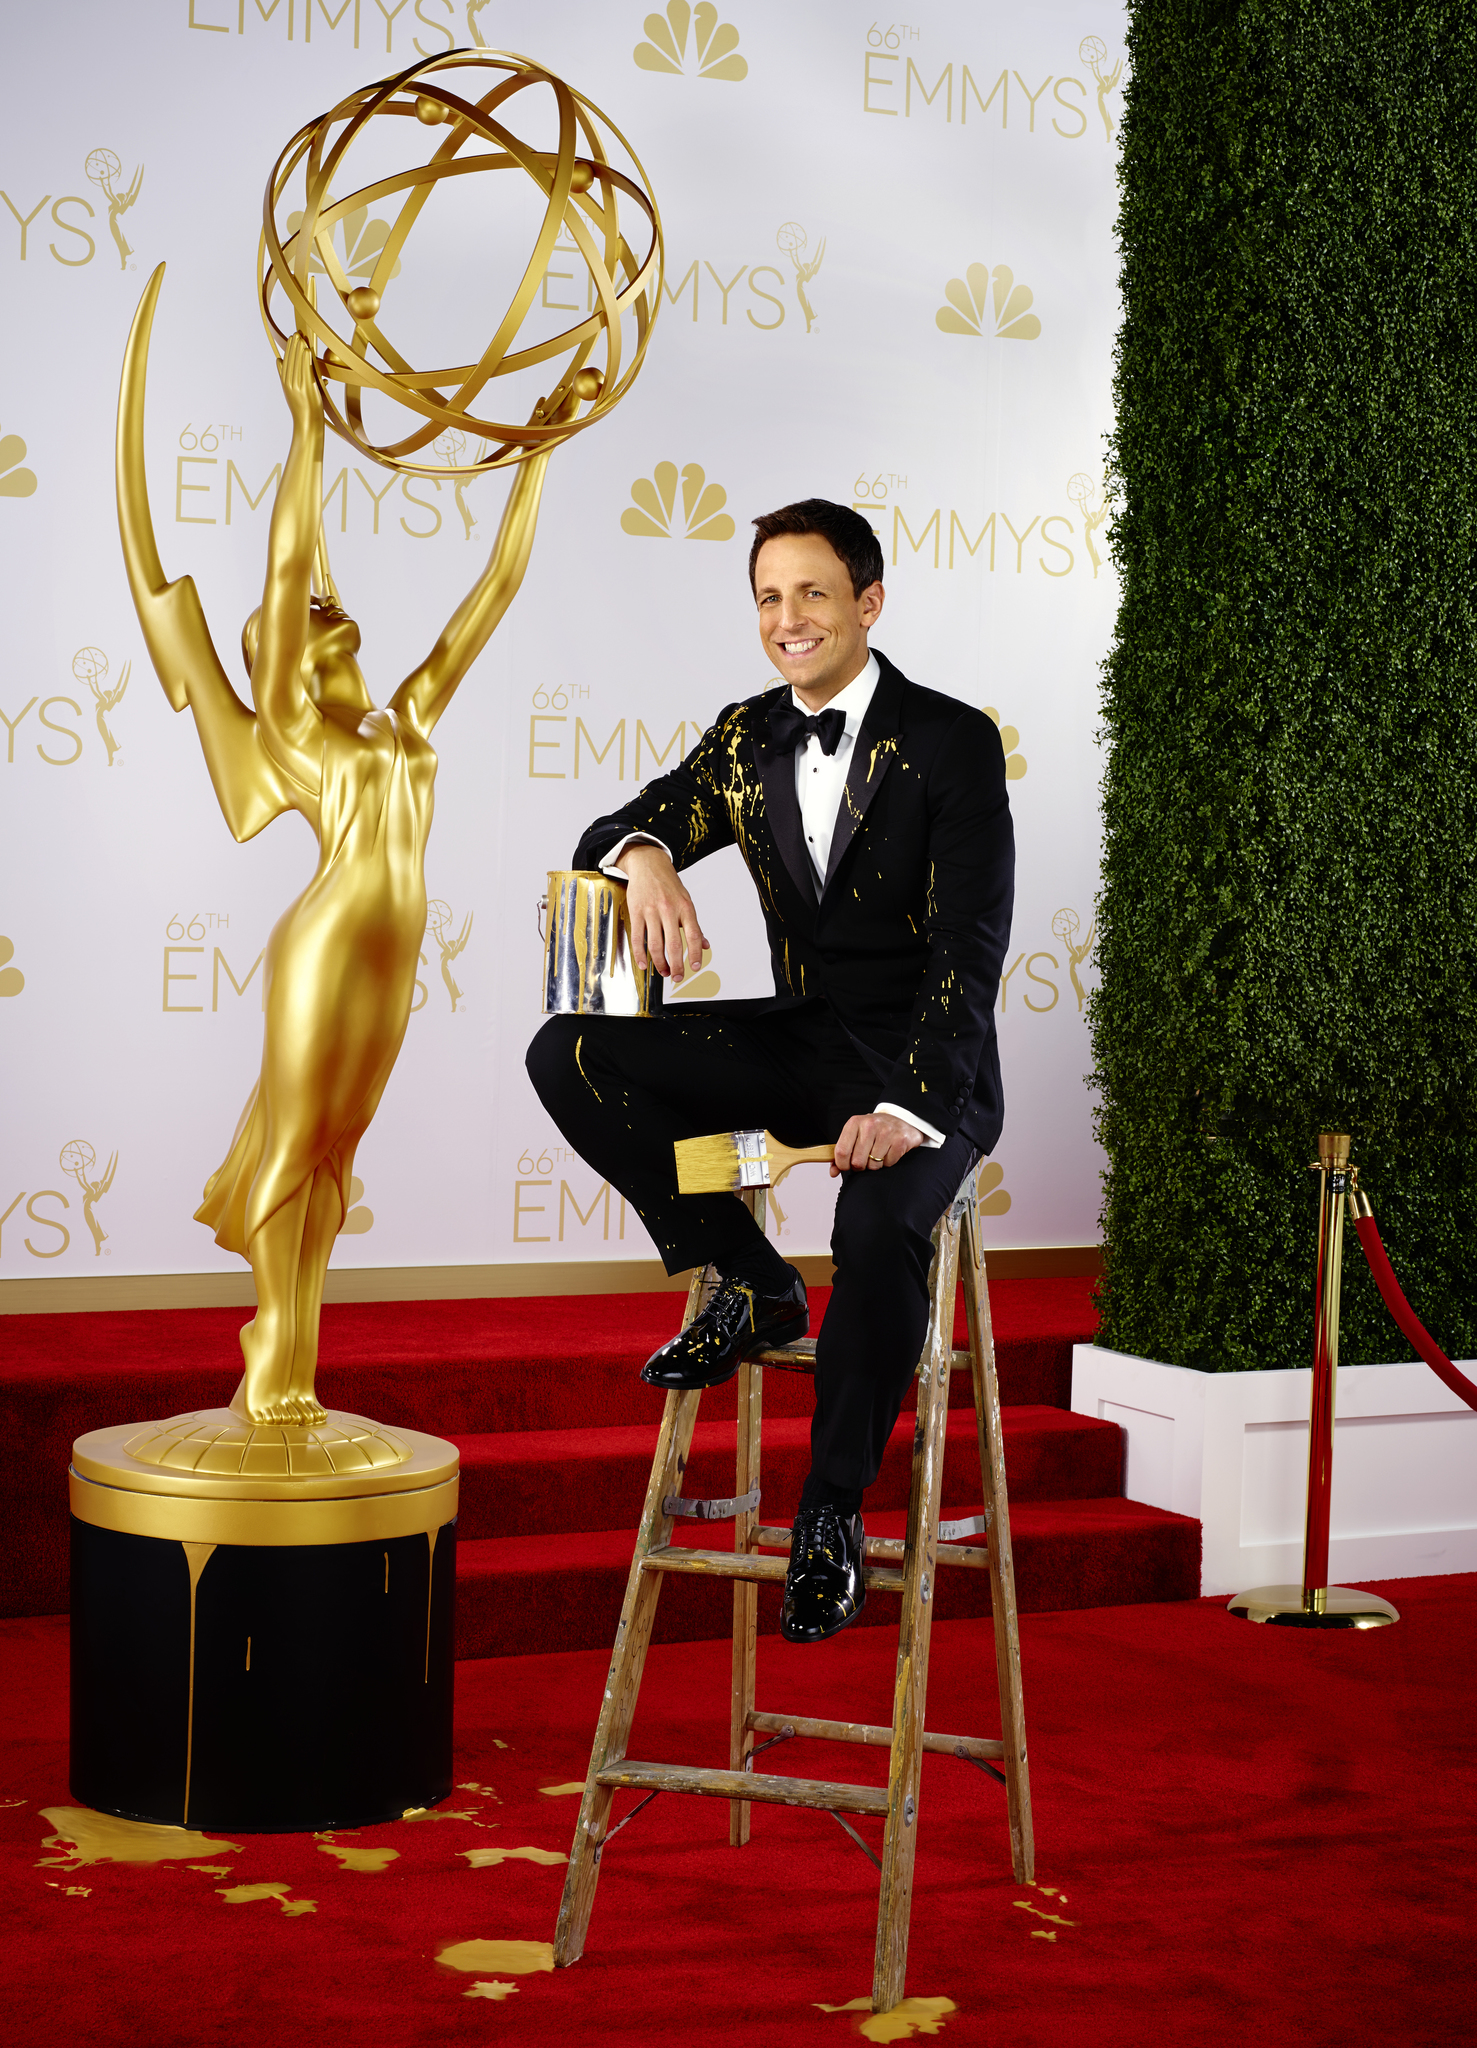 Seth Meyers at event of The 66th Primetime Emmy Awards (2014)